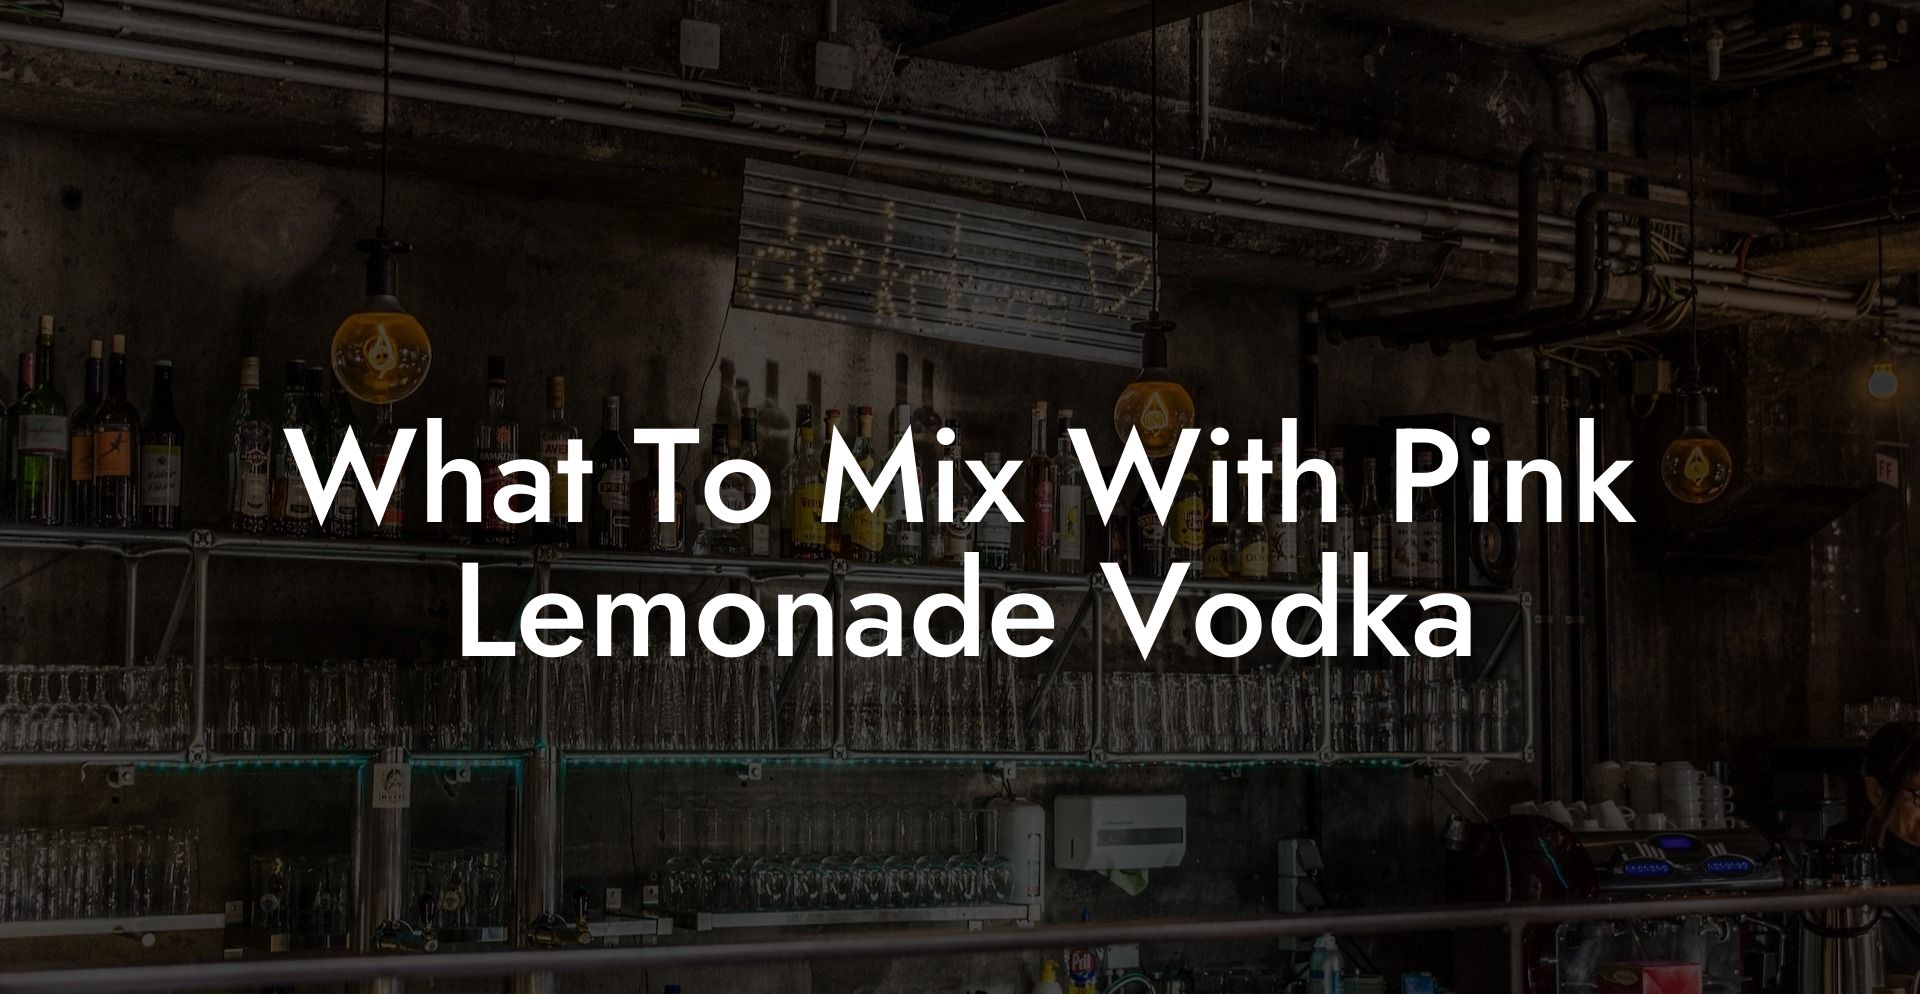 What To Mix With Pink Lemonade Vodka